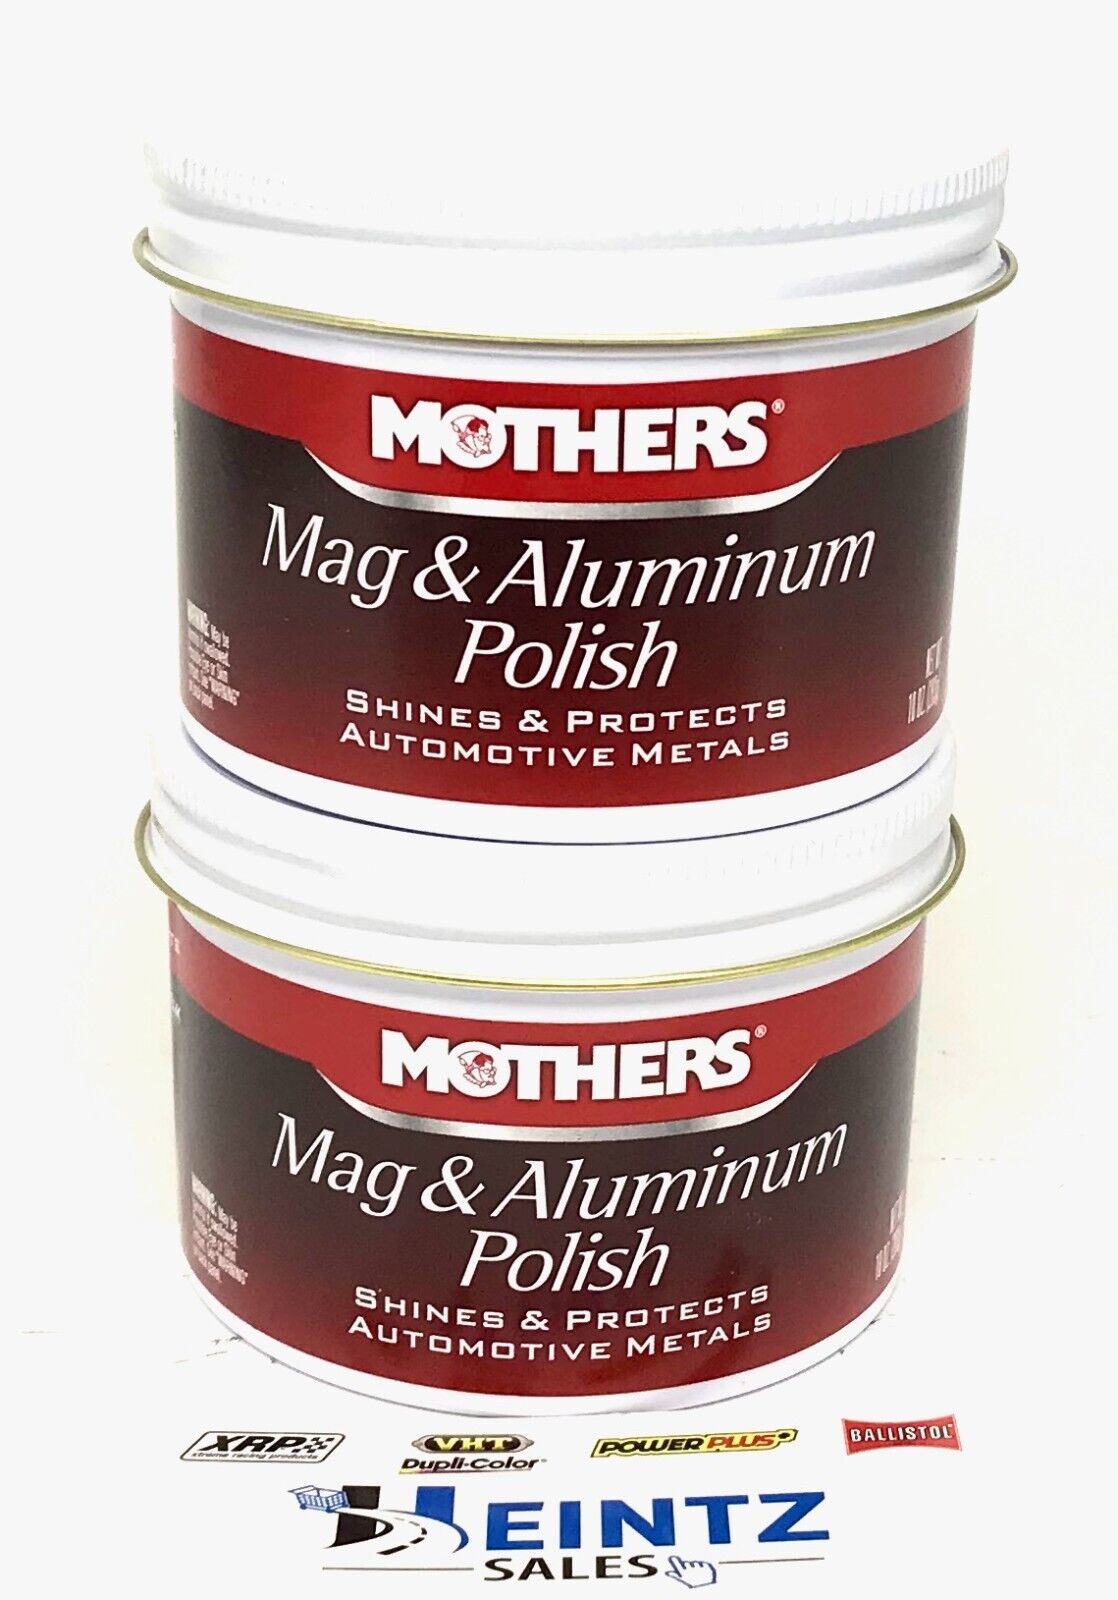 MOTHERS 05100 Mag & Aluminum Polish - Shines & Protects - Brass - 5 oz.